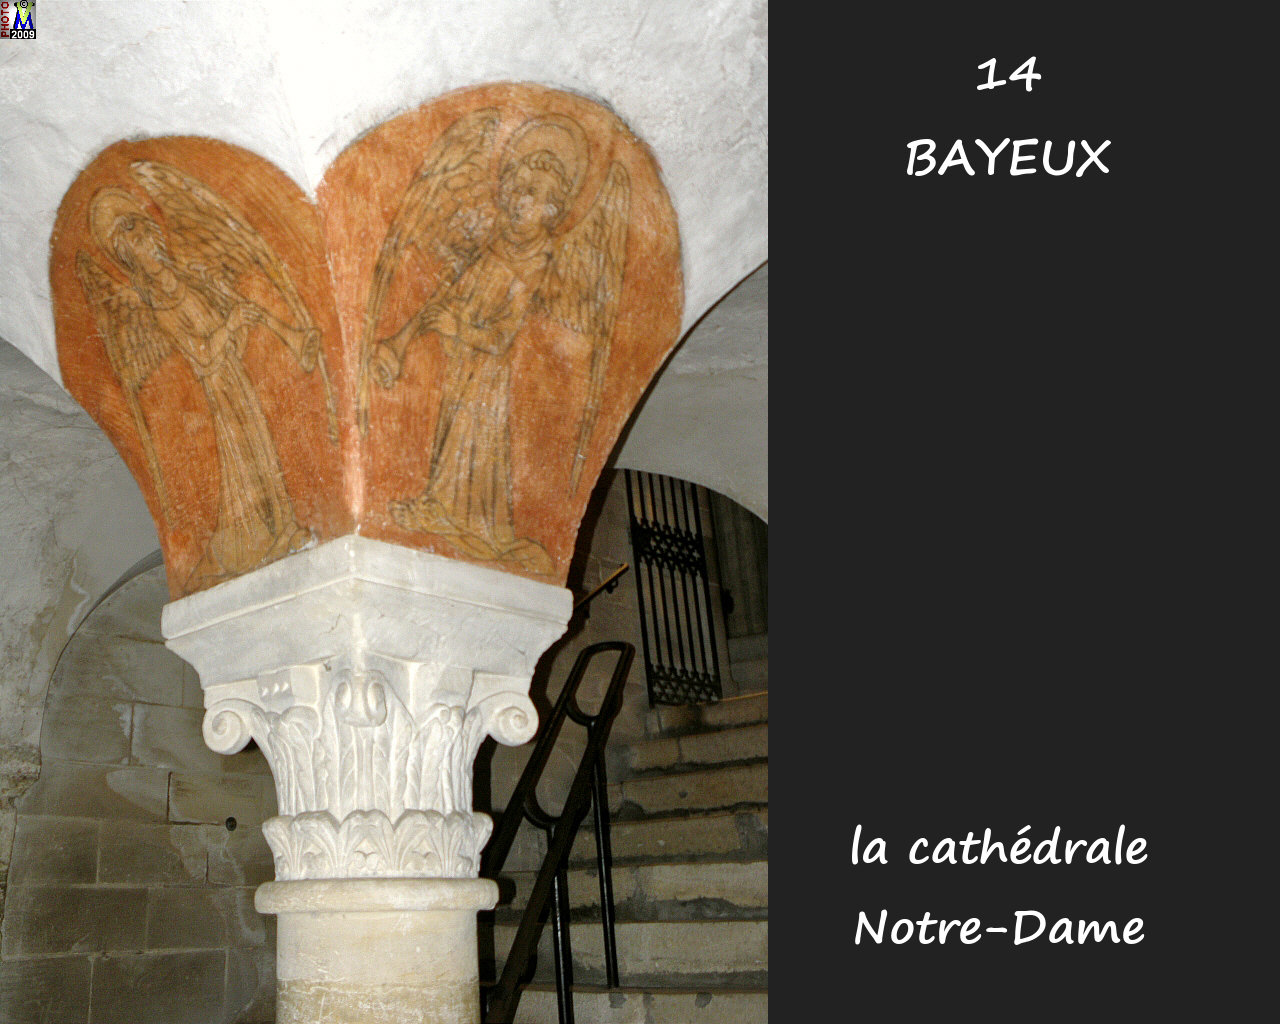 14BAYEUX_cathedrale_314.jpg